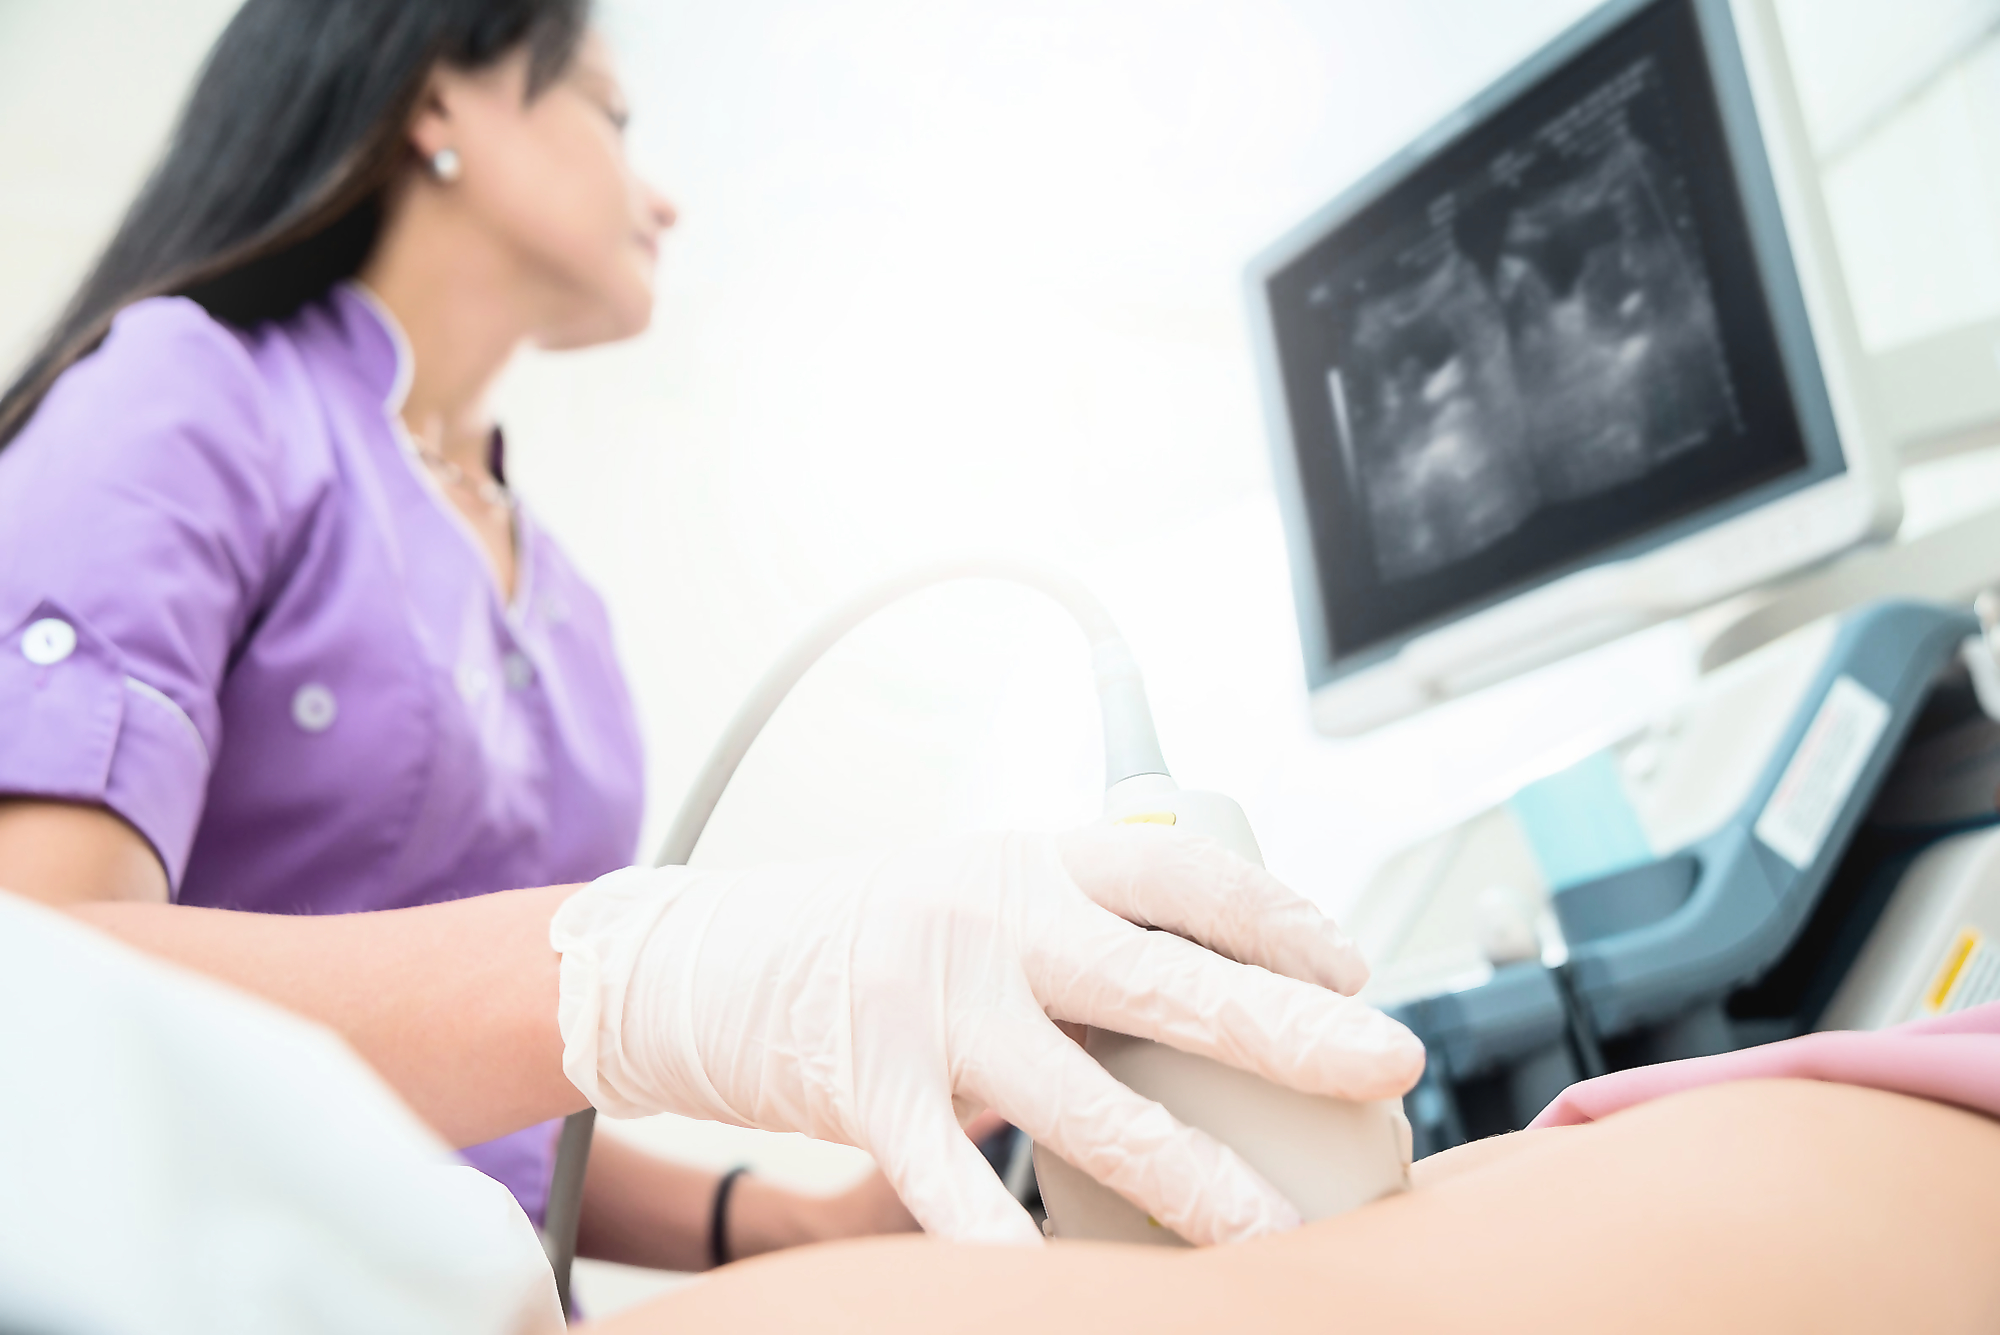 Global Ultrasound Devices Market Poised for Explosive Growth, Reaching ...